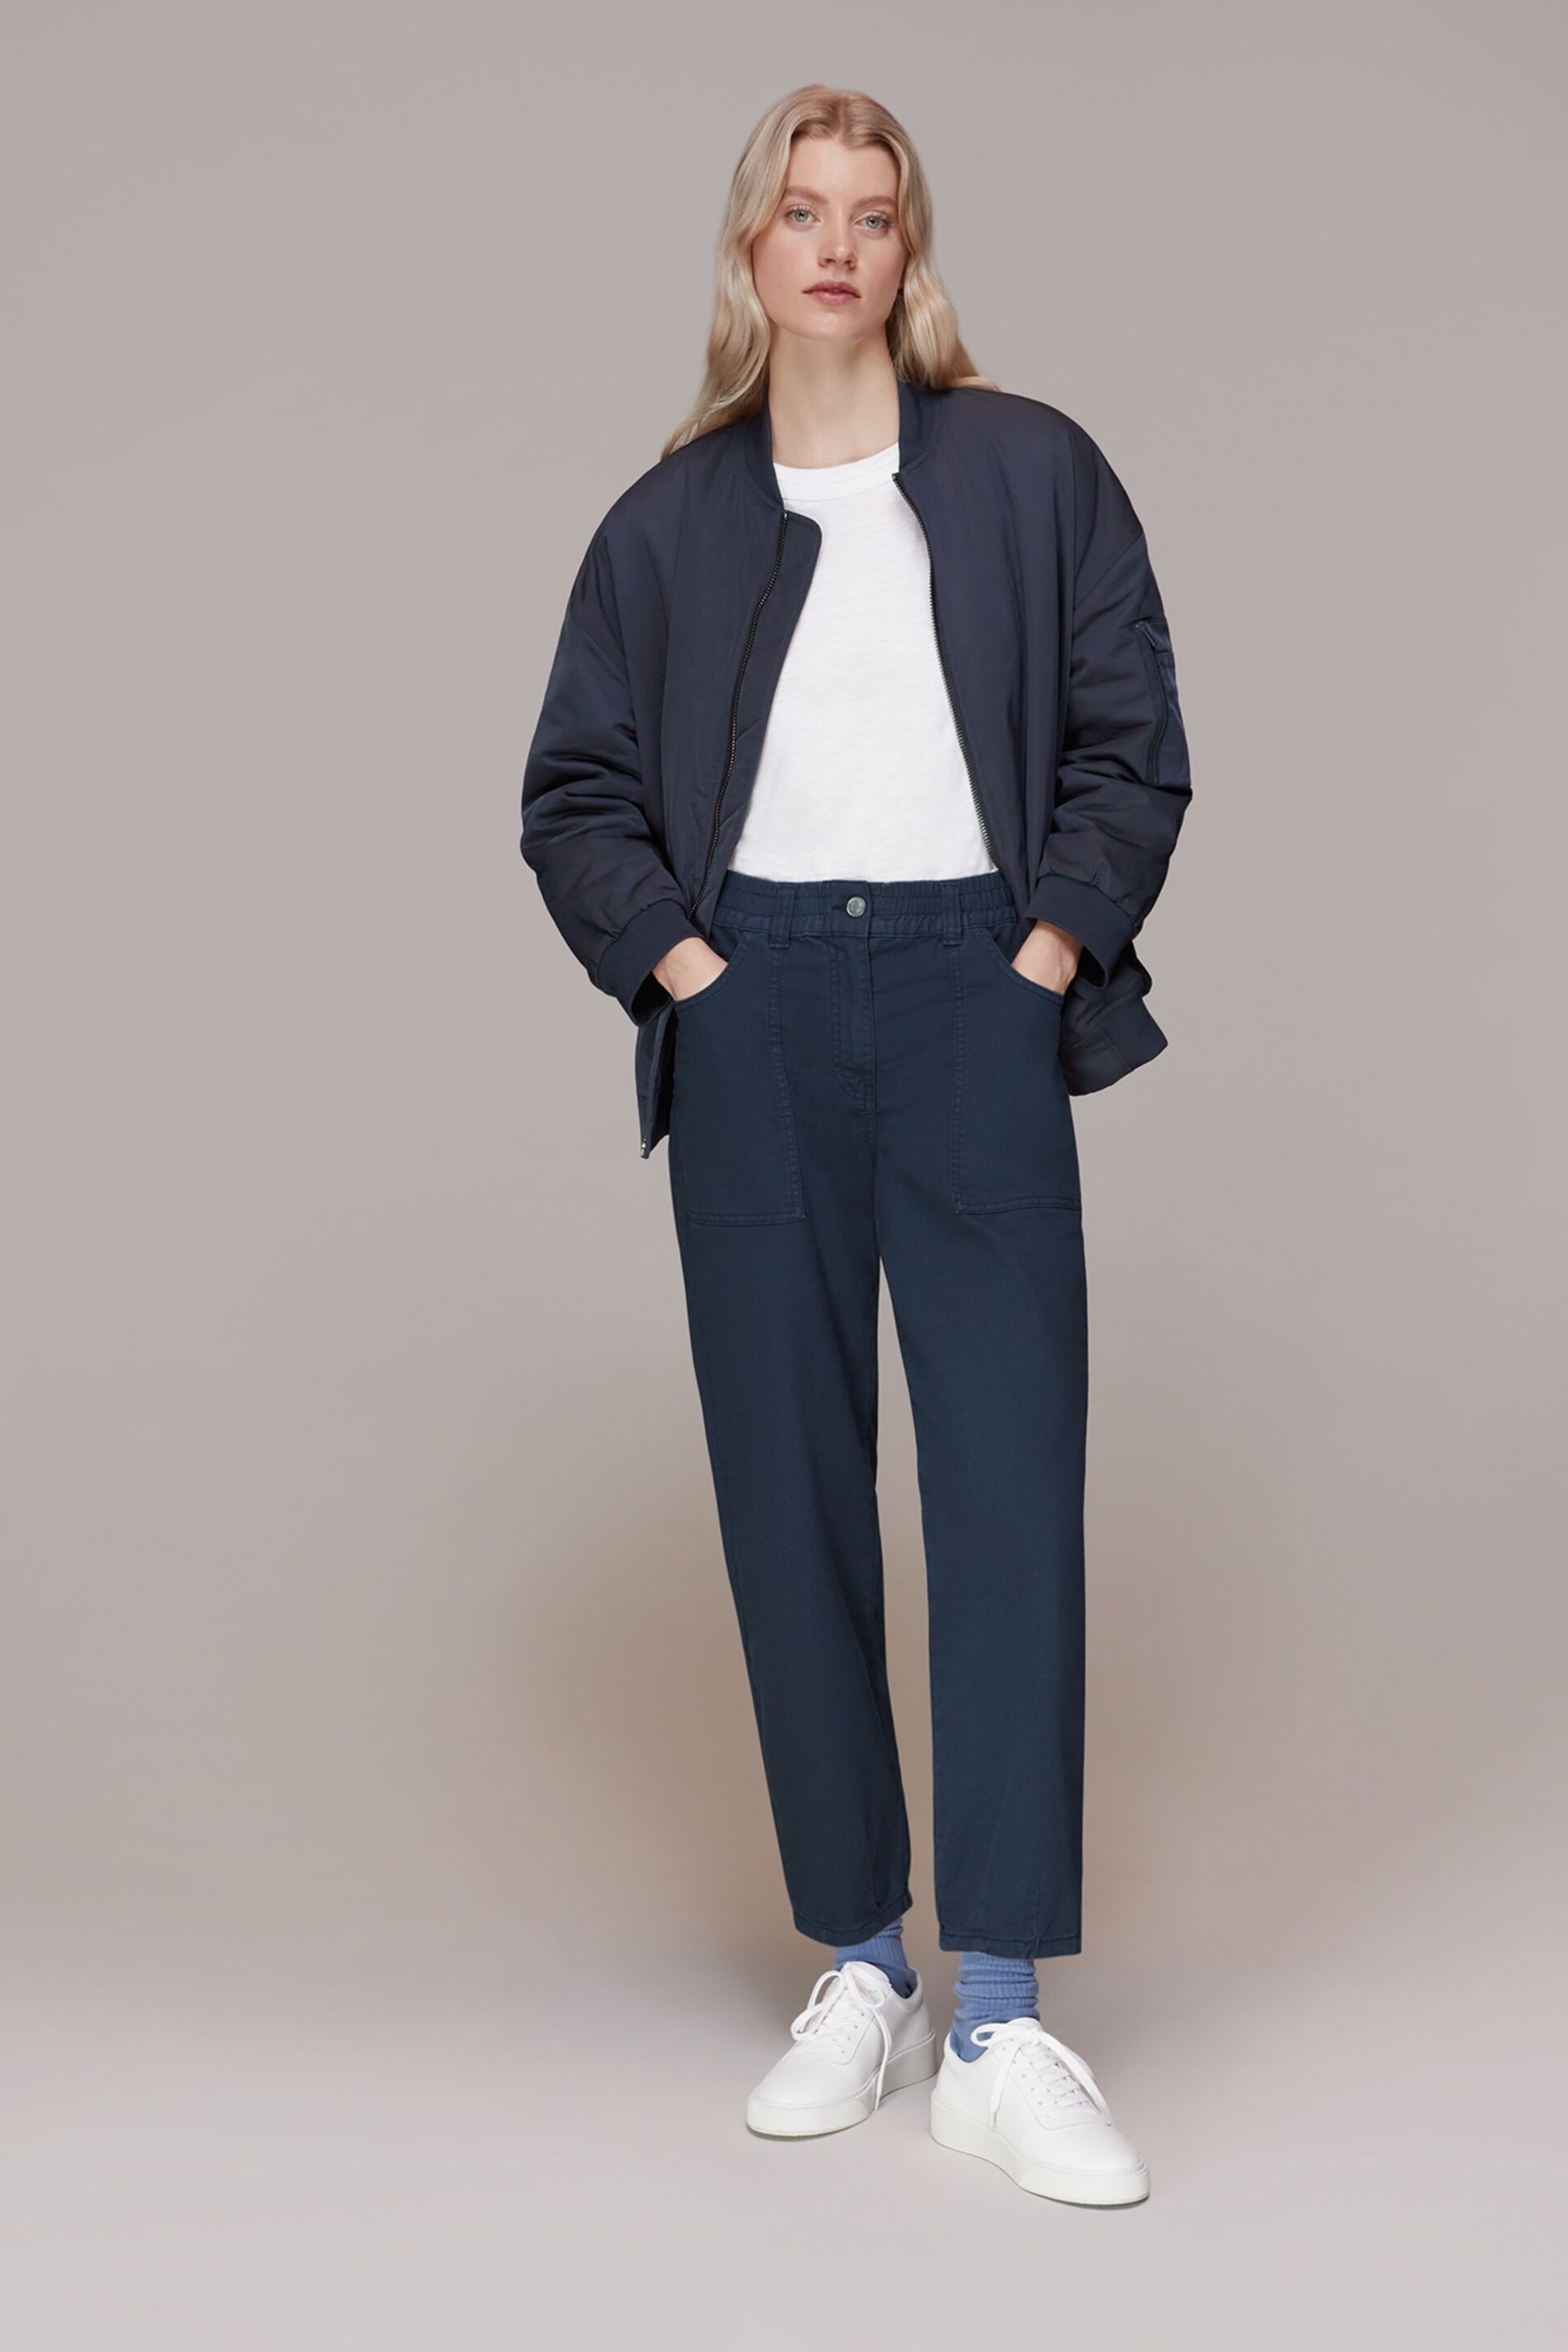 Whistles Blue Tessa Casual Trousers - Image 1 of 5